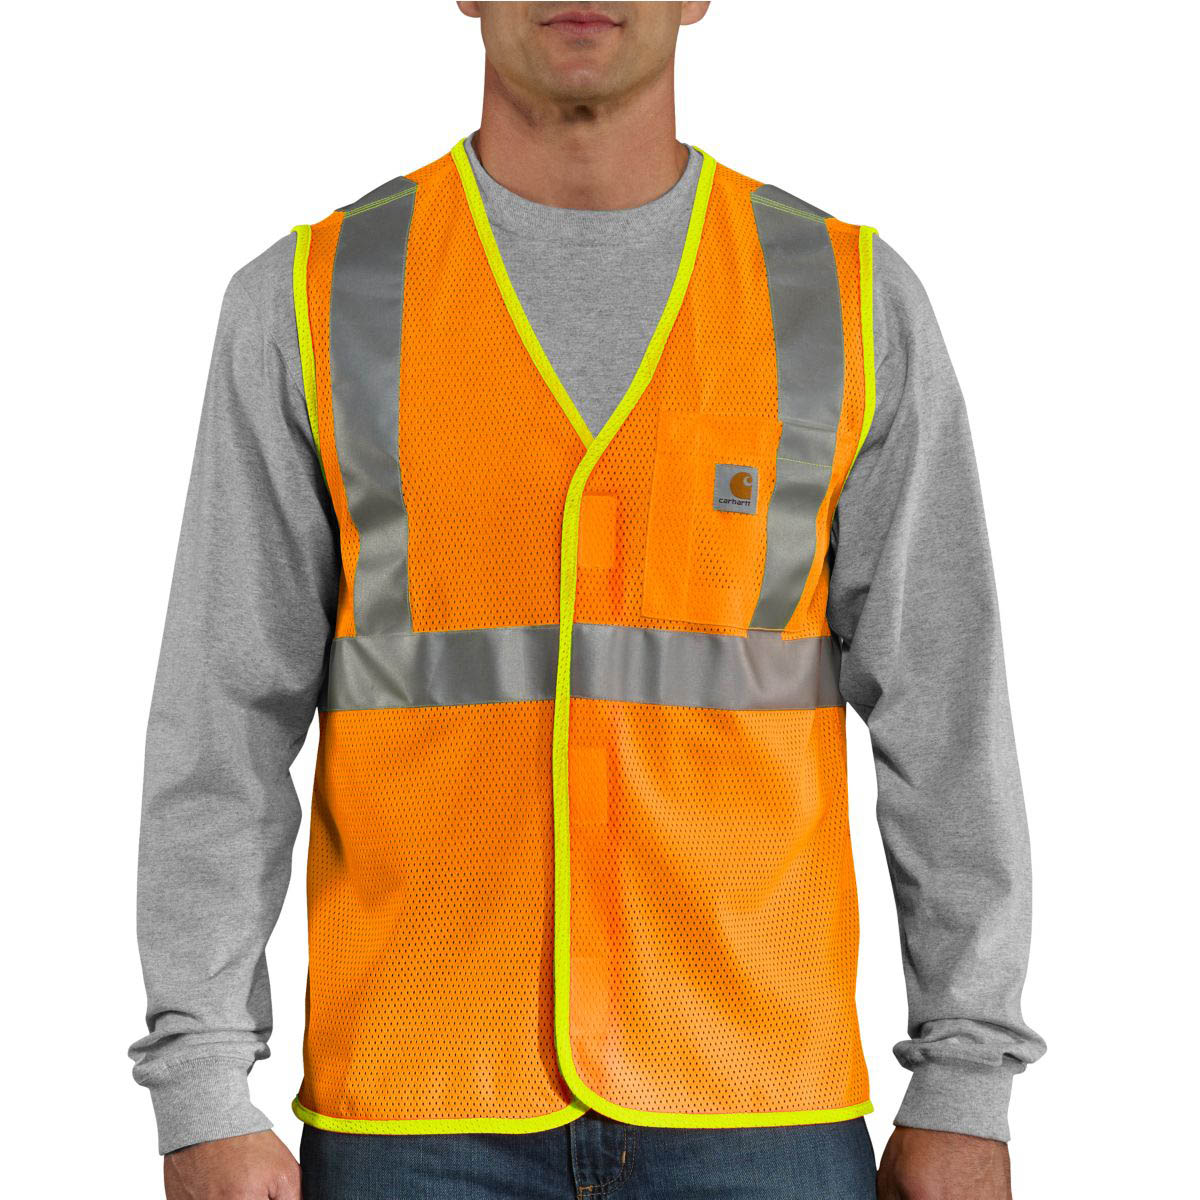 Carhartt Men's High-Visibility Class 2 Vest - Discontinued Pricing